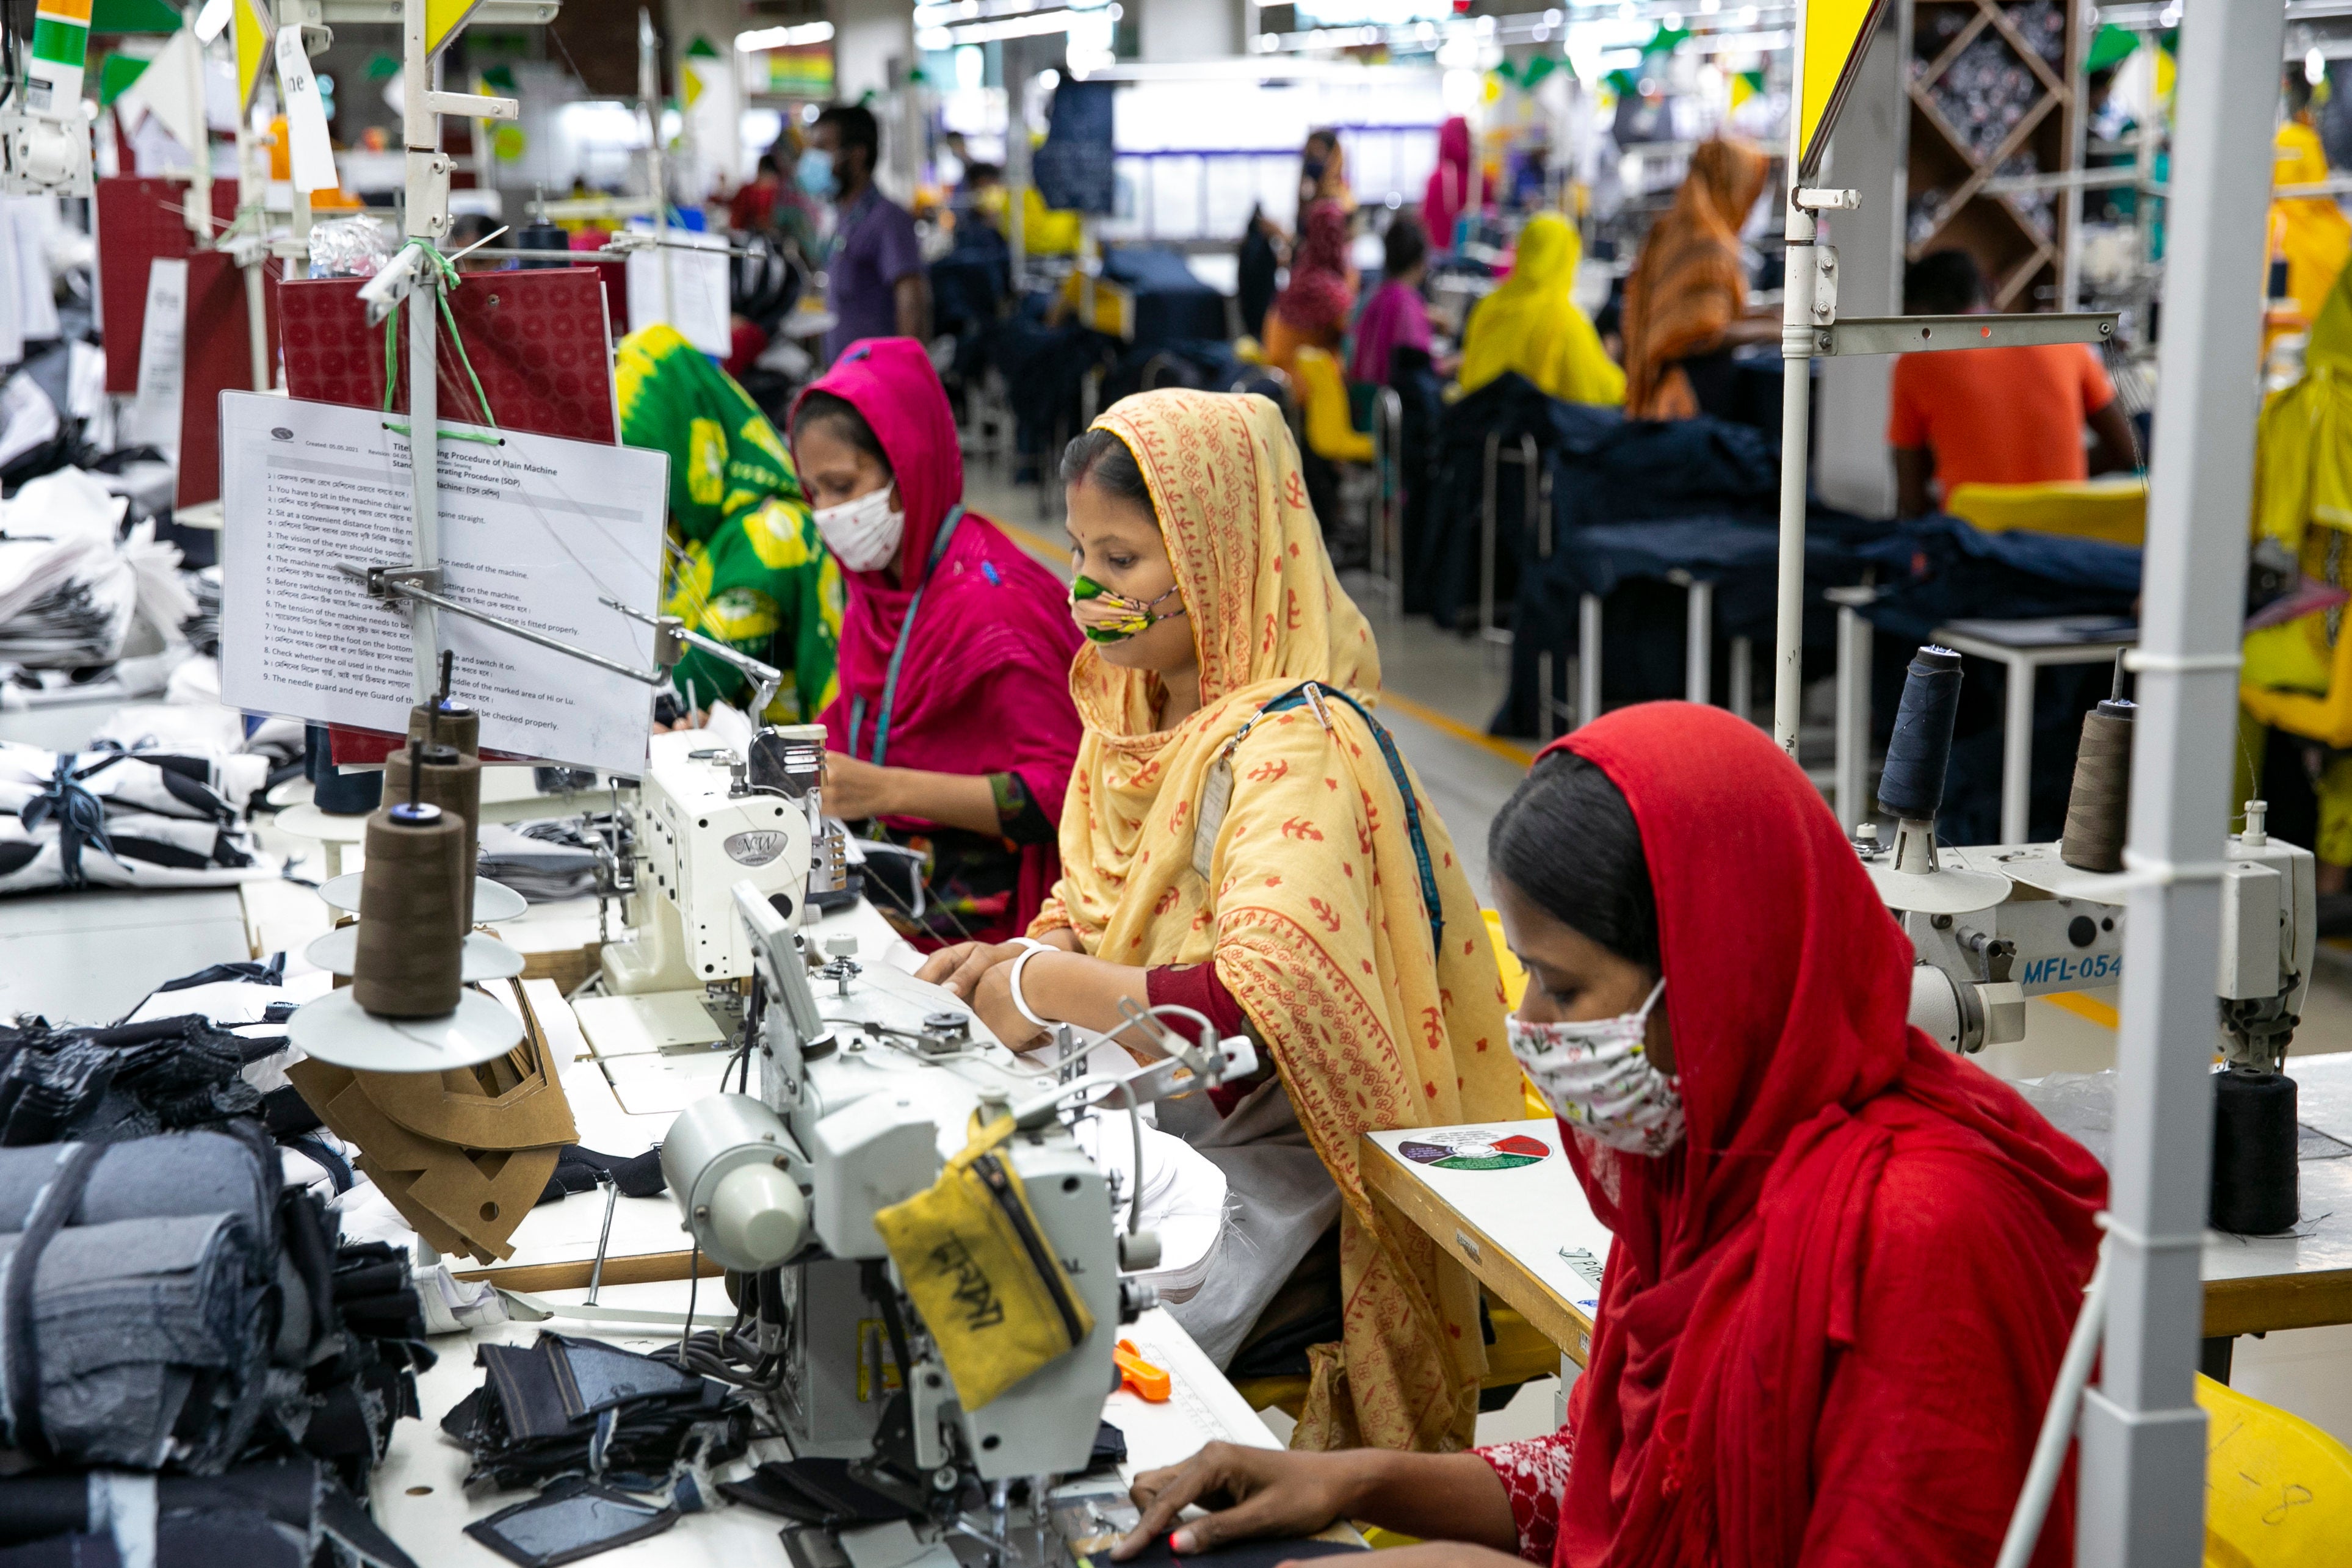 Garment workers at a factory in Dhaka, Bangladesh during the Covid-19 pandemic